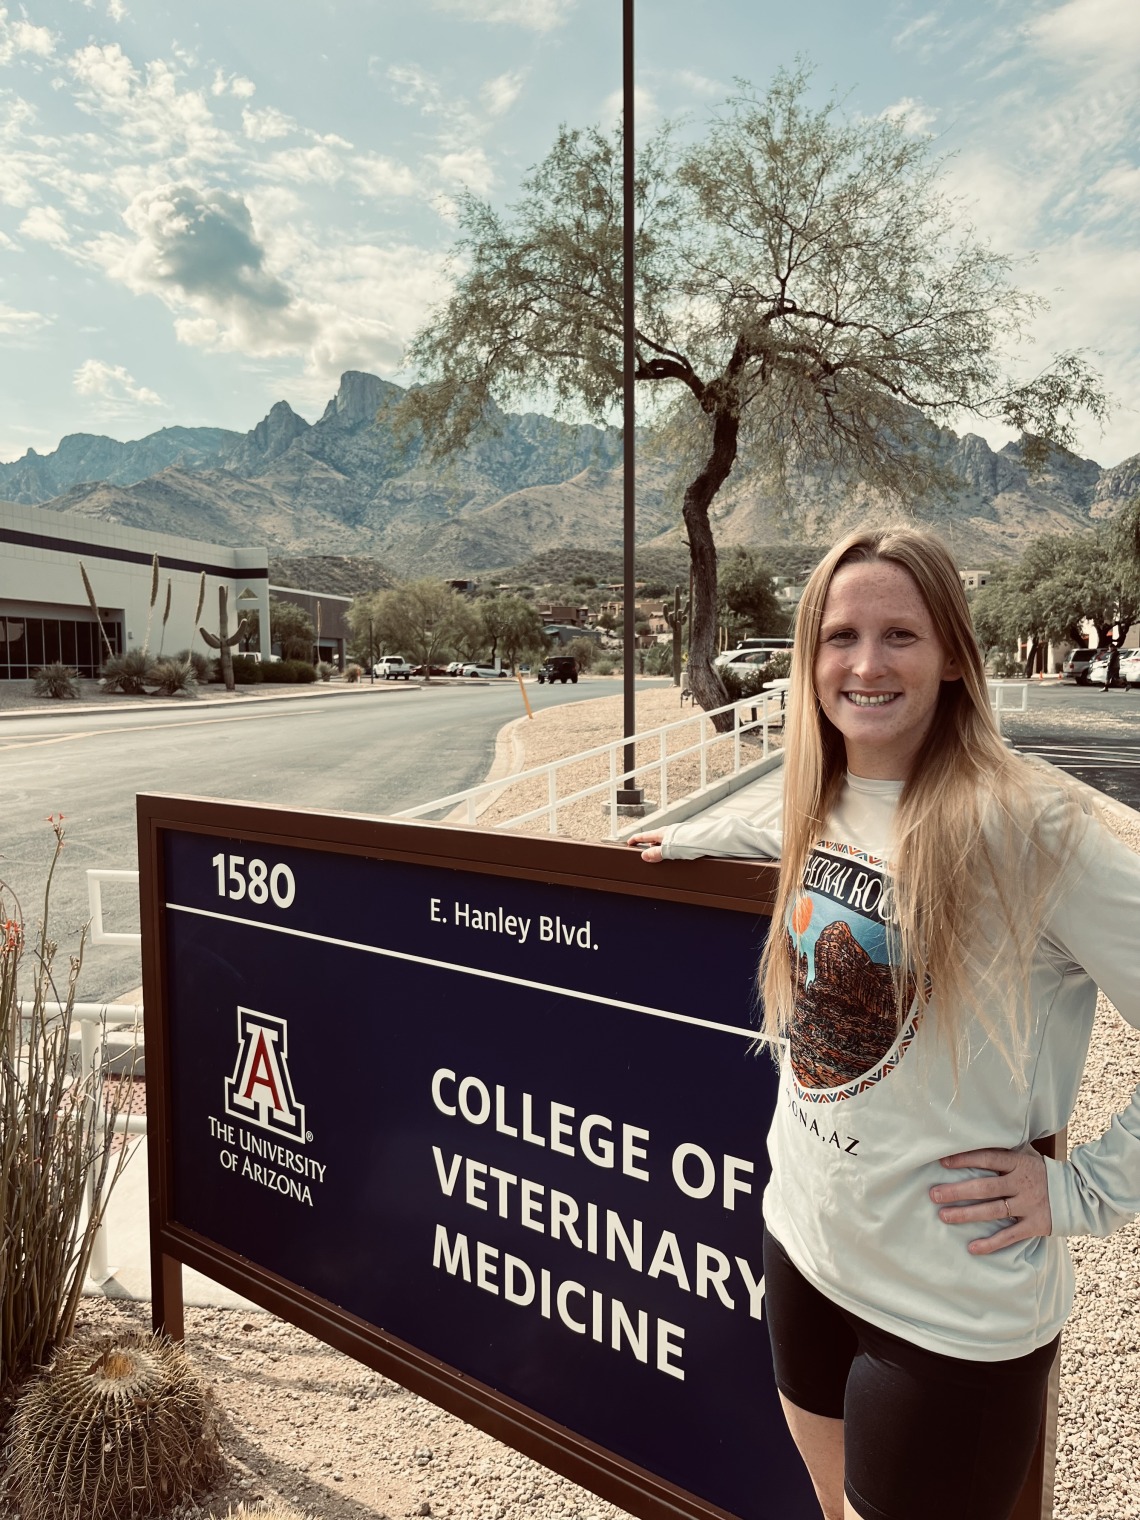 Katherine Liccione poses in front of the "College of Veterinary Medicine" sign, against an overcast mountain background.